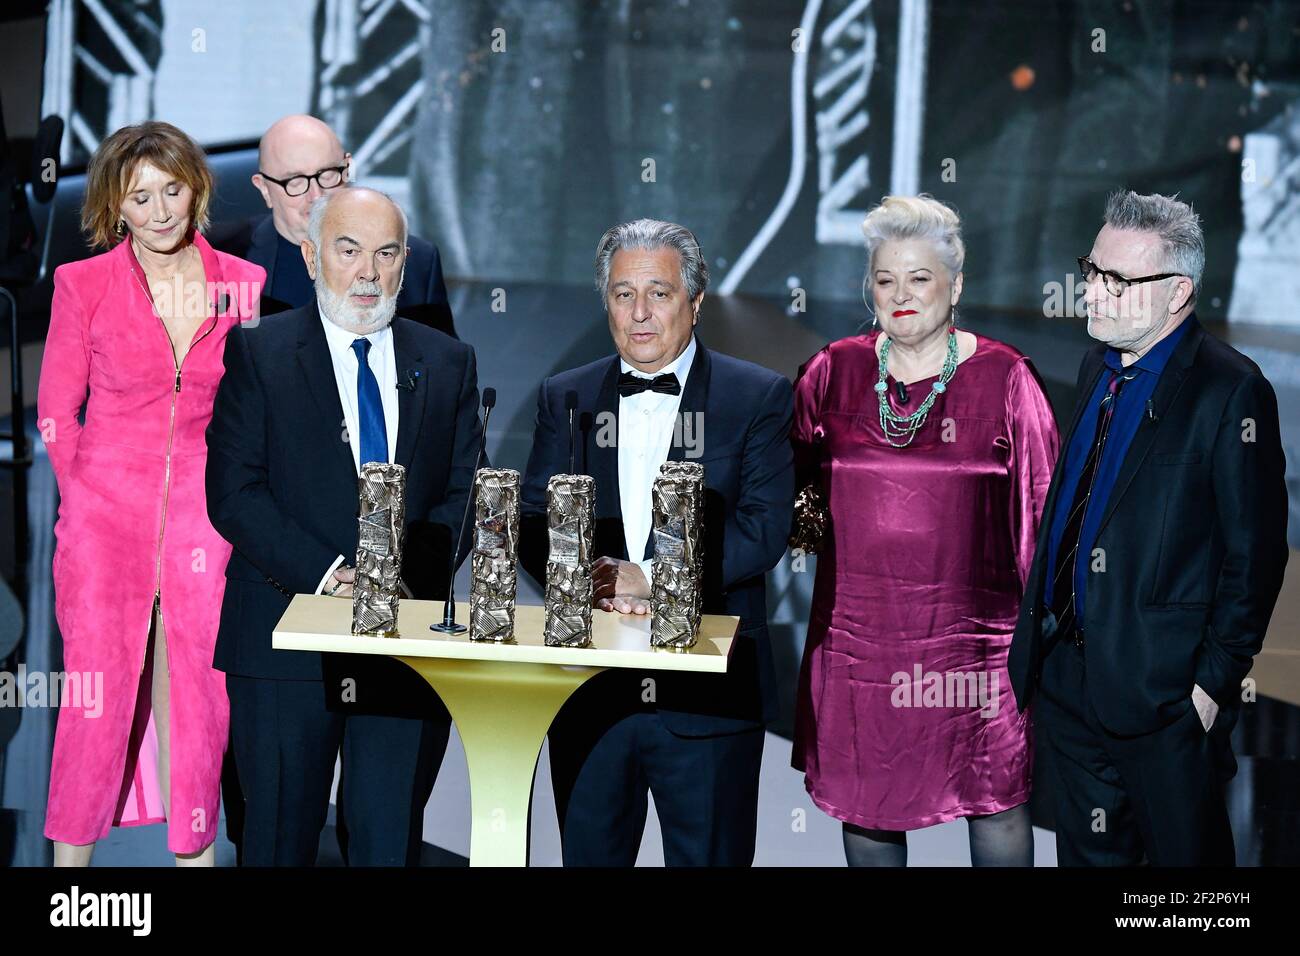 Christian Clavier, Michel Blanc, Josiane Balasko, Thierry Lhermitte,  Marie-Anne Chazel, Gerard Jugnot and Bruno Moynot during the 46th edition  of the Cesar Film Awards ceremony at the Olympia in Paris, France on